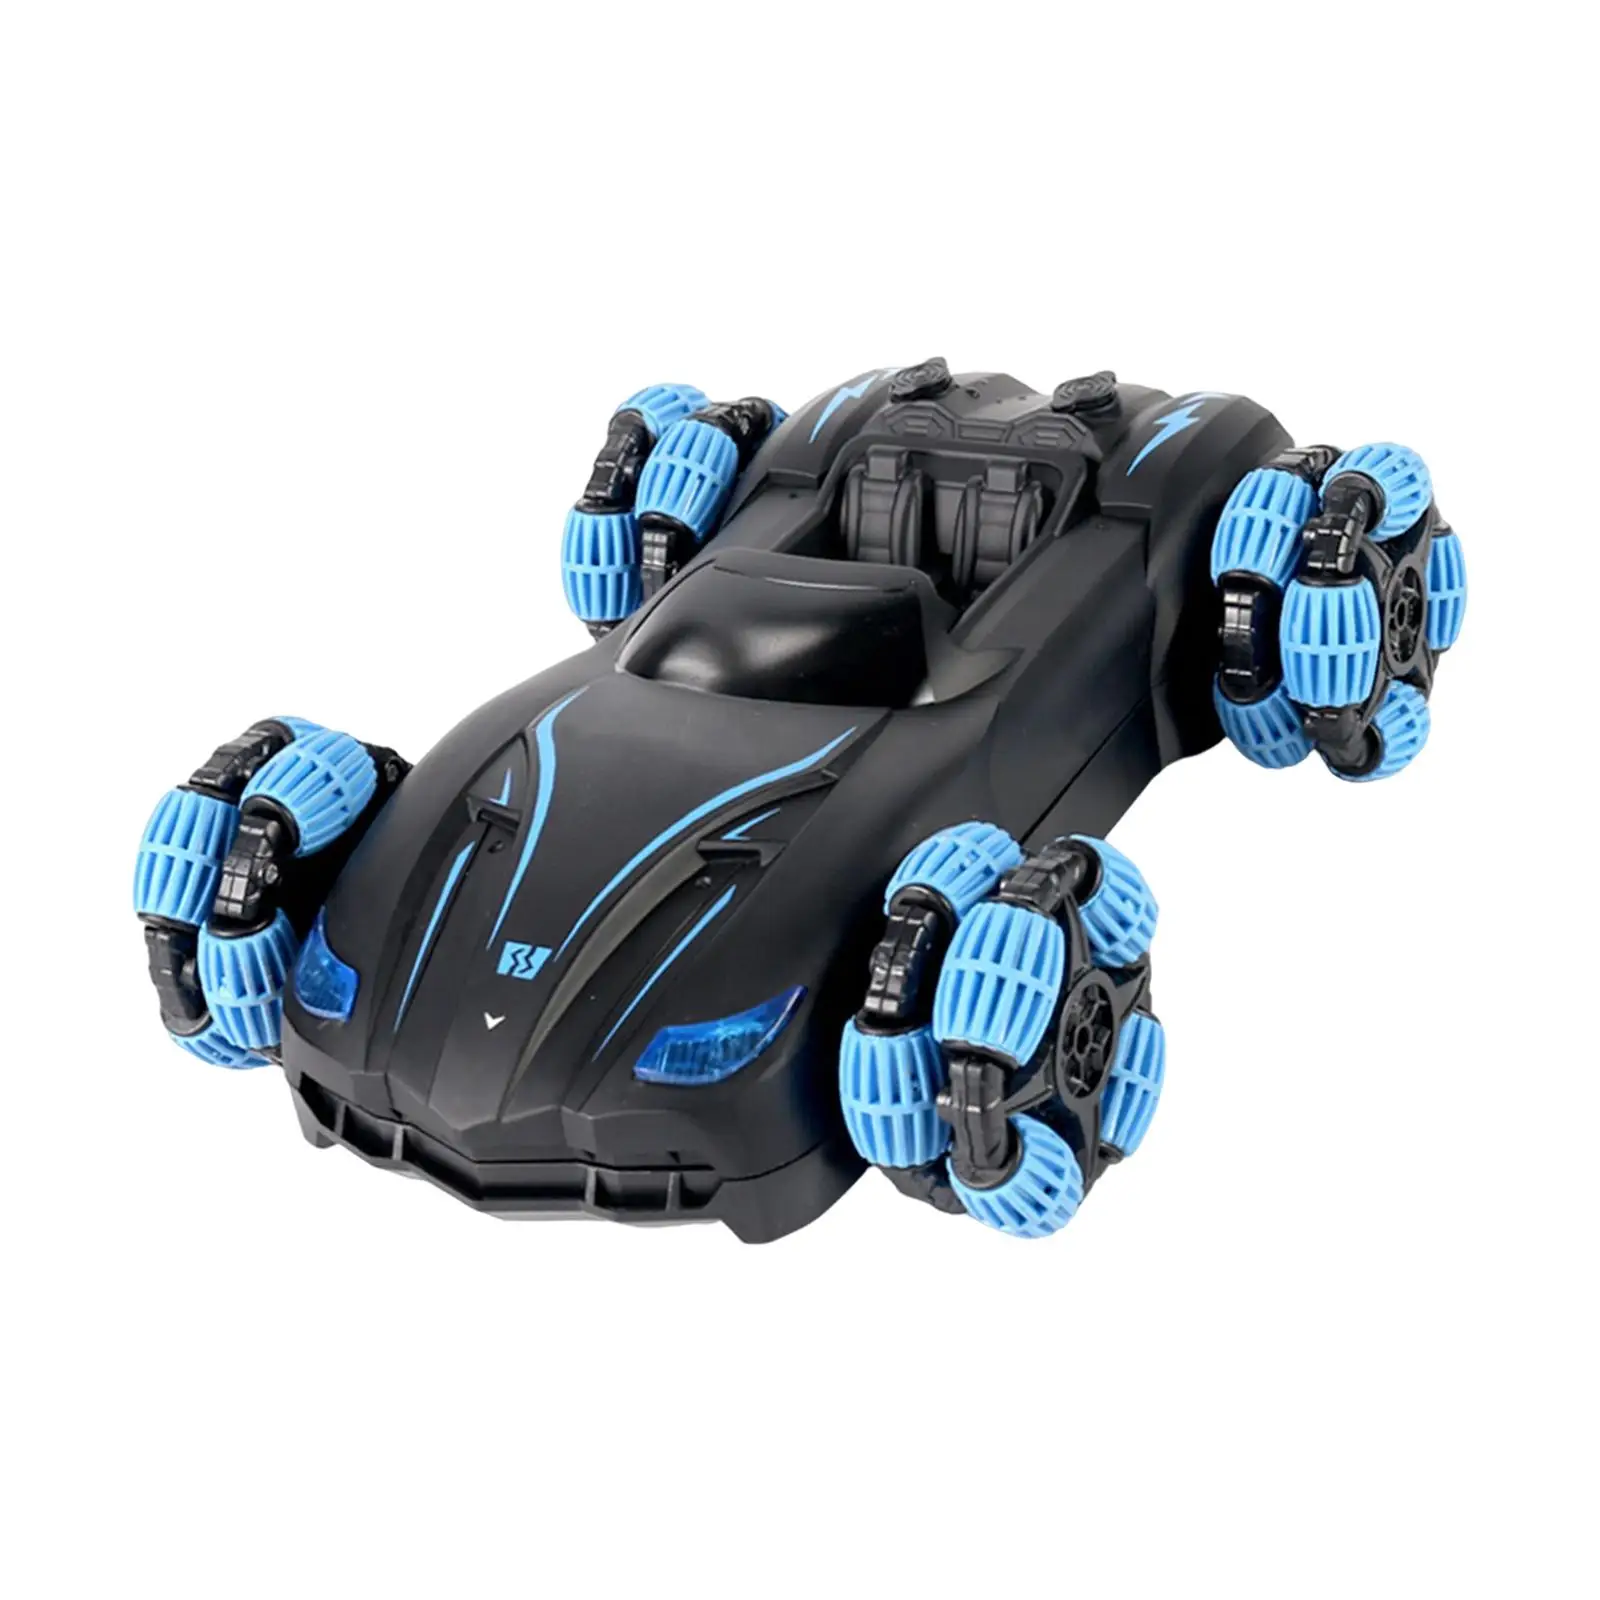 RC Car for Kids 4WD Crawler Car RC Vehicle Toys with LED Light and Music for Boy